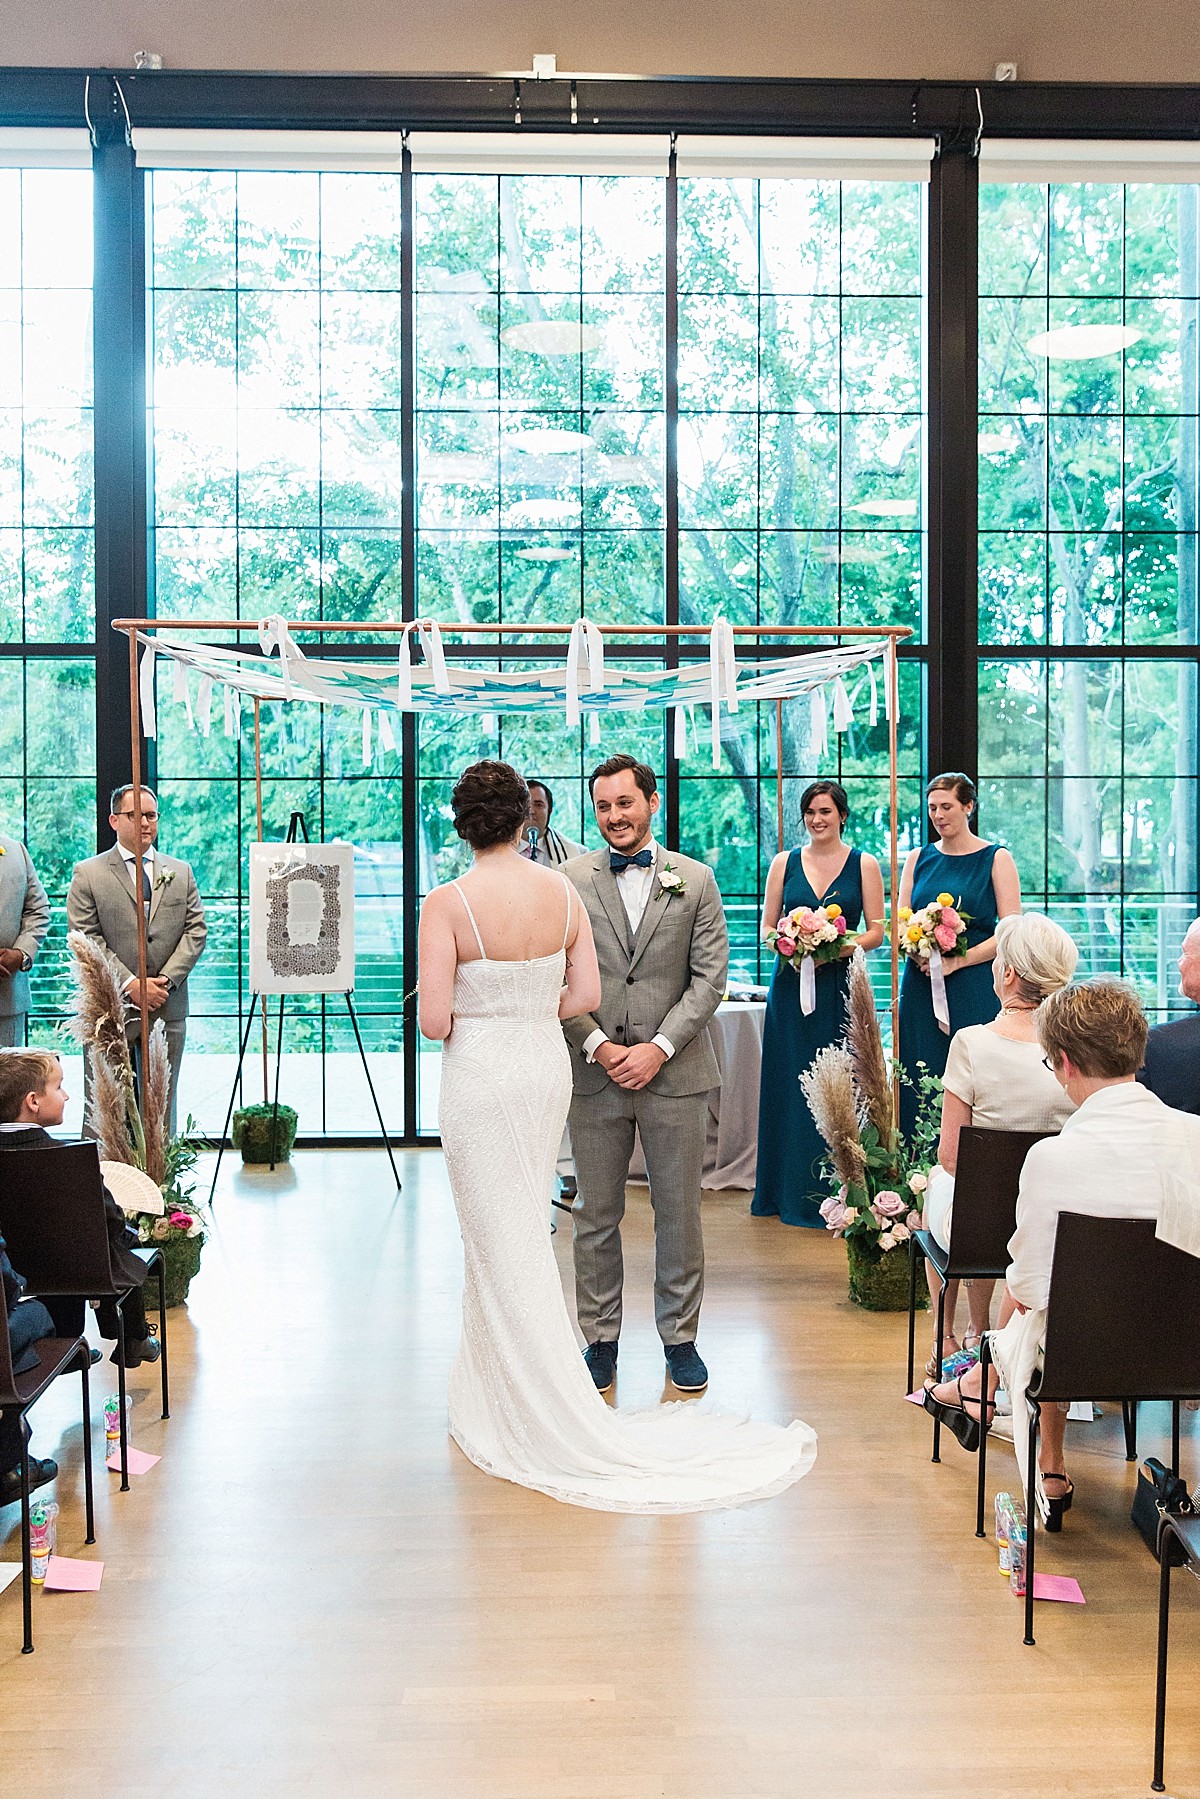 Candid romantic jewish ceremony photography by Clean Plate Pictures, Hudson Valley wedding photographer.